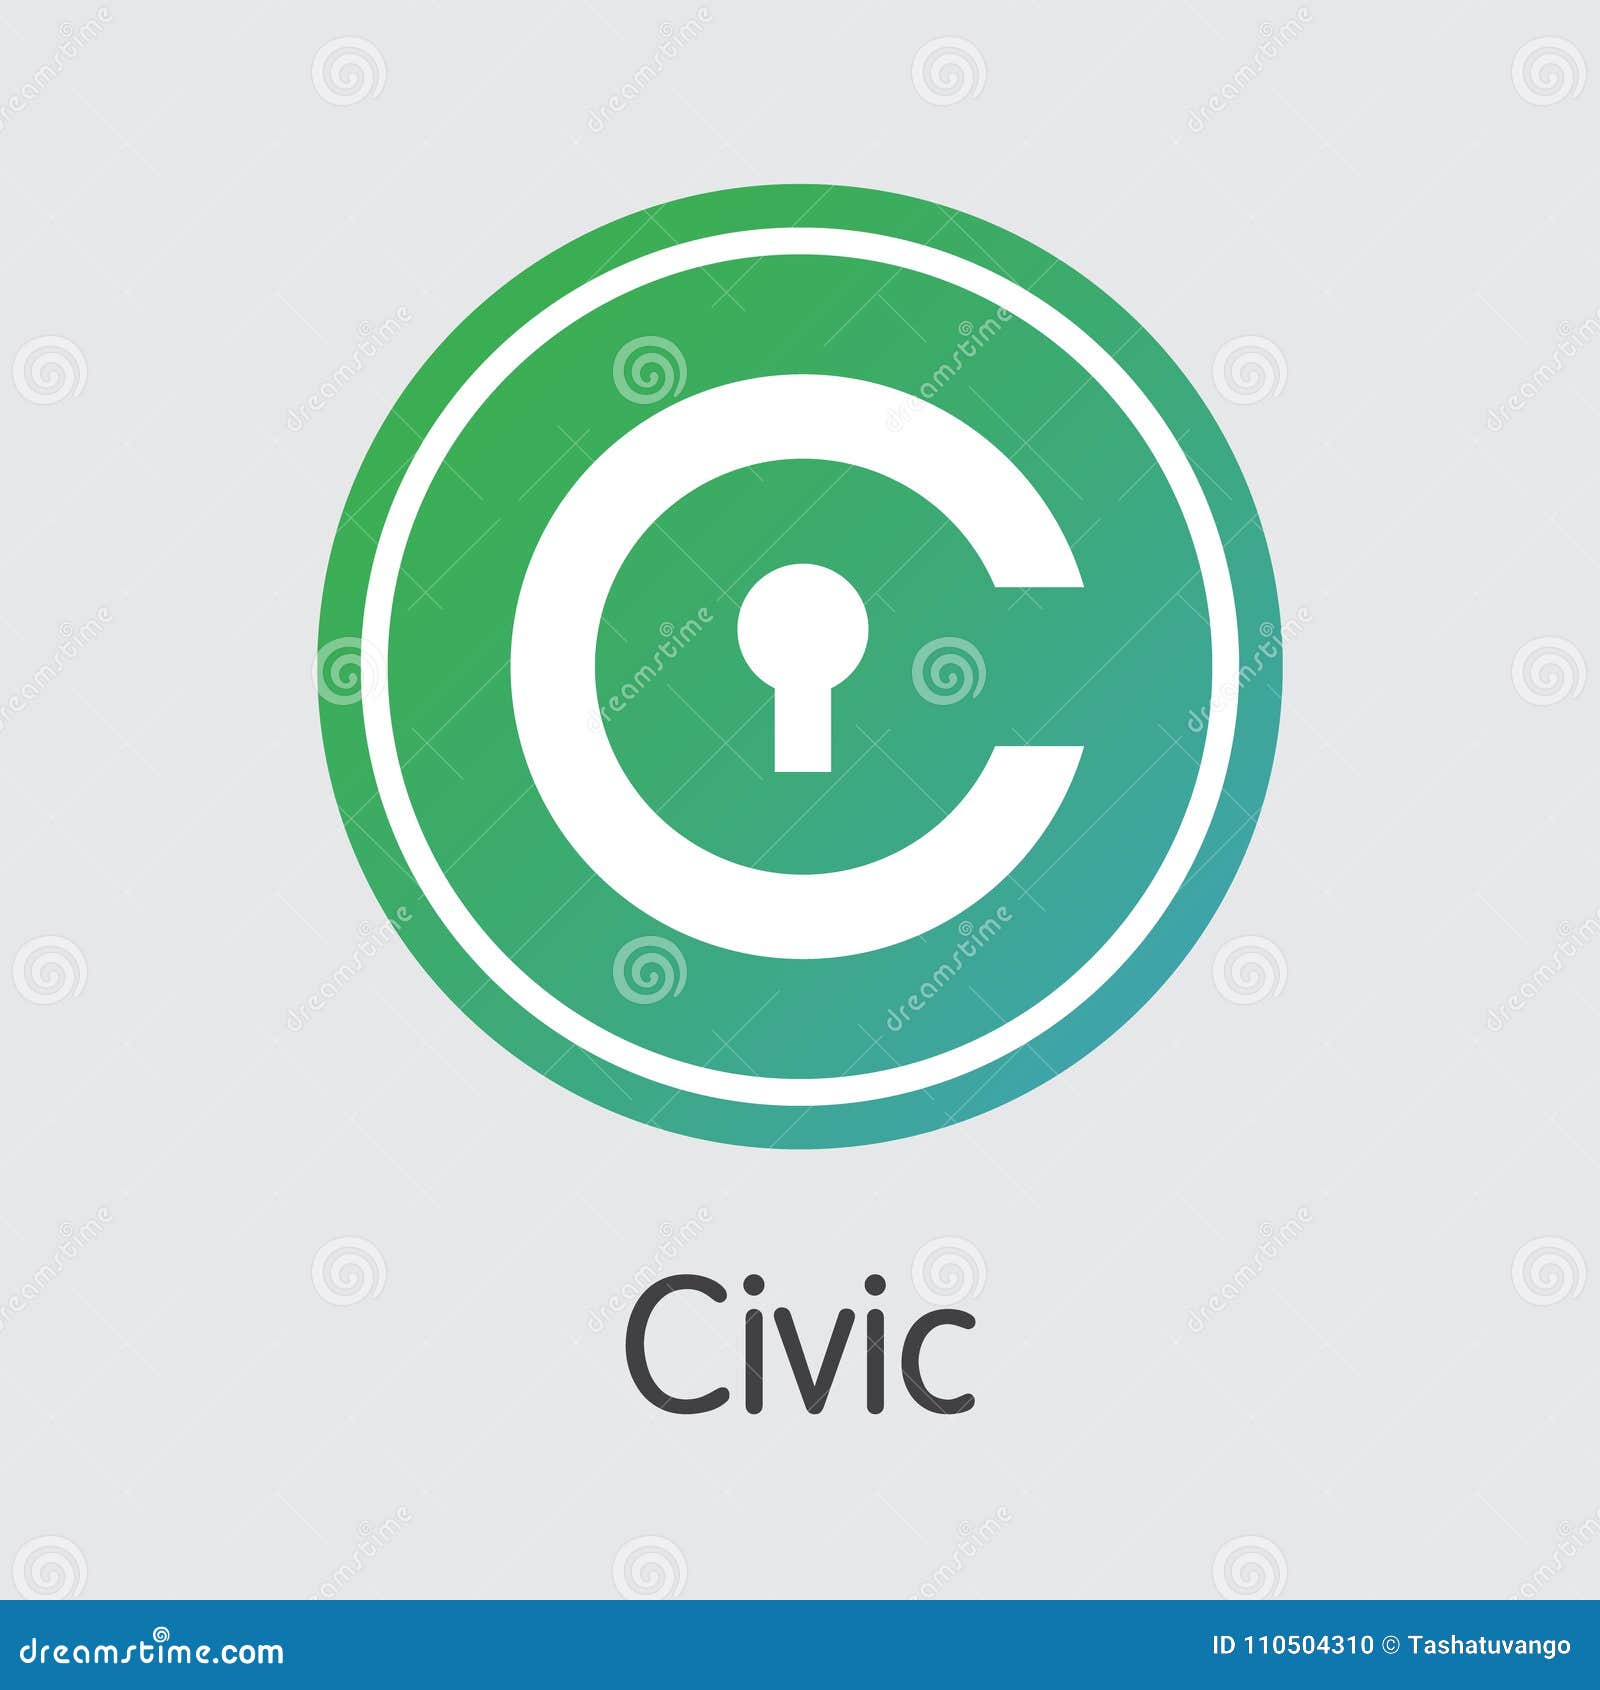 Civic sells $33 million in digital currency tokens in public sale | Reuters